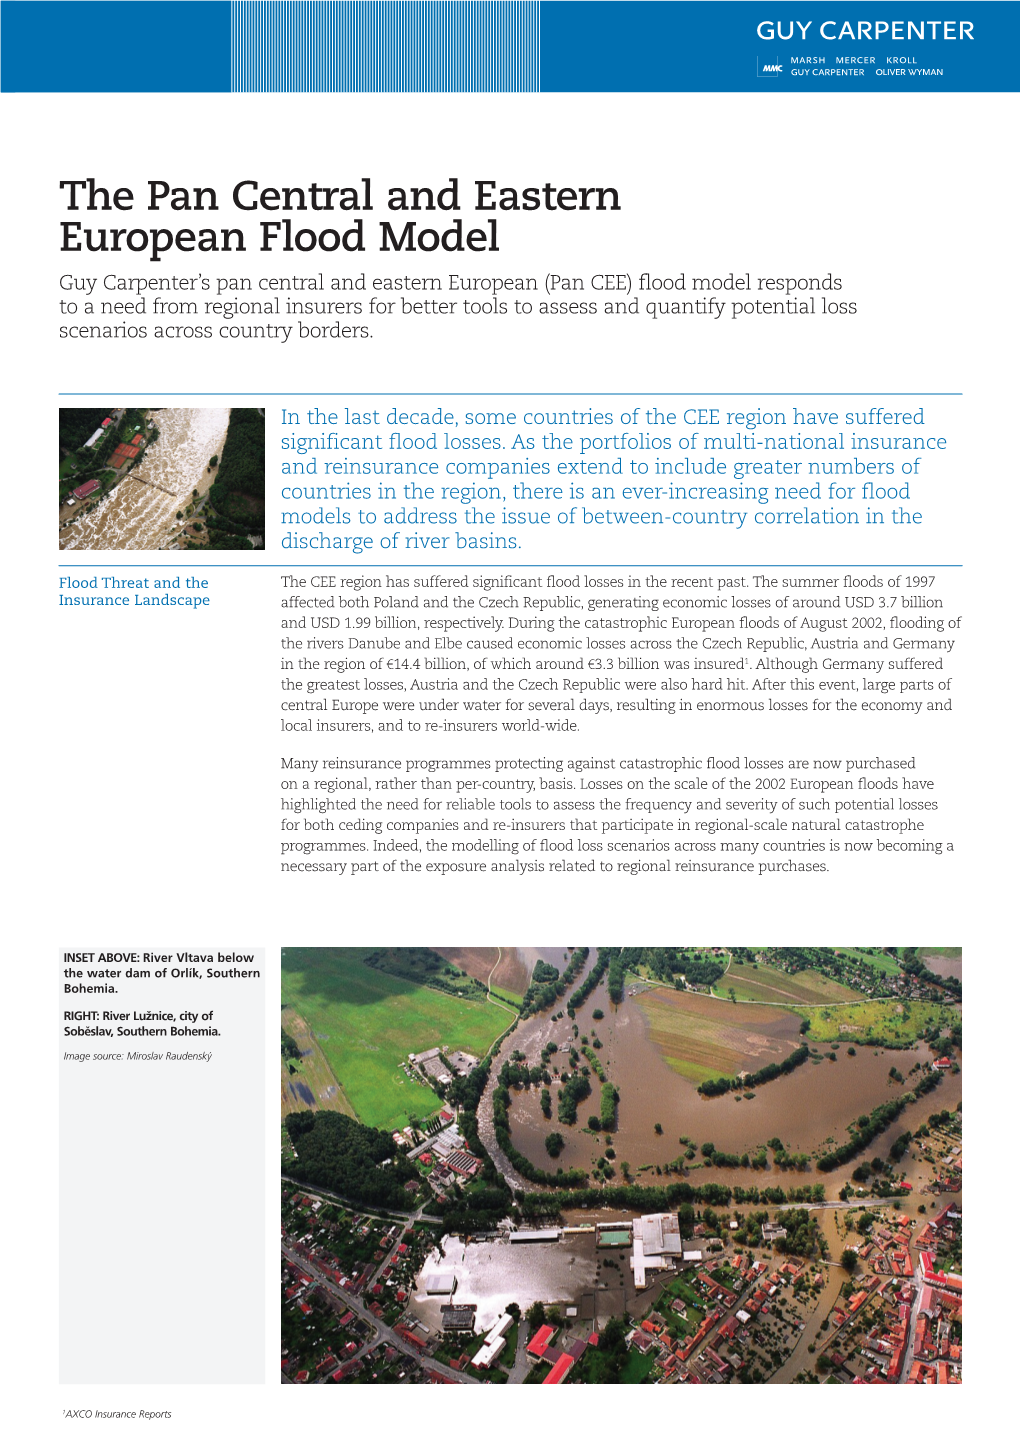 The Pan Central and Eastern European Flood Model